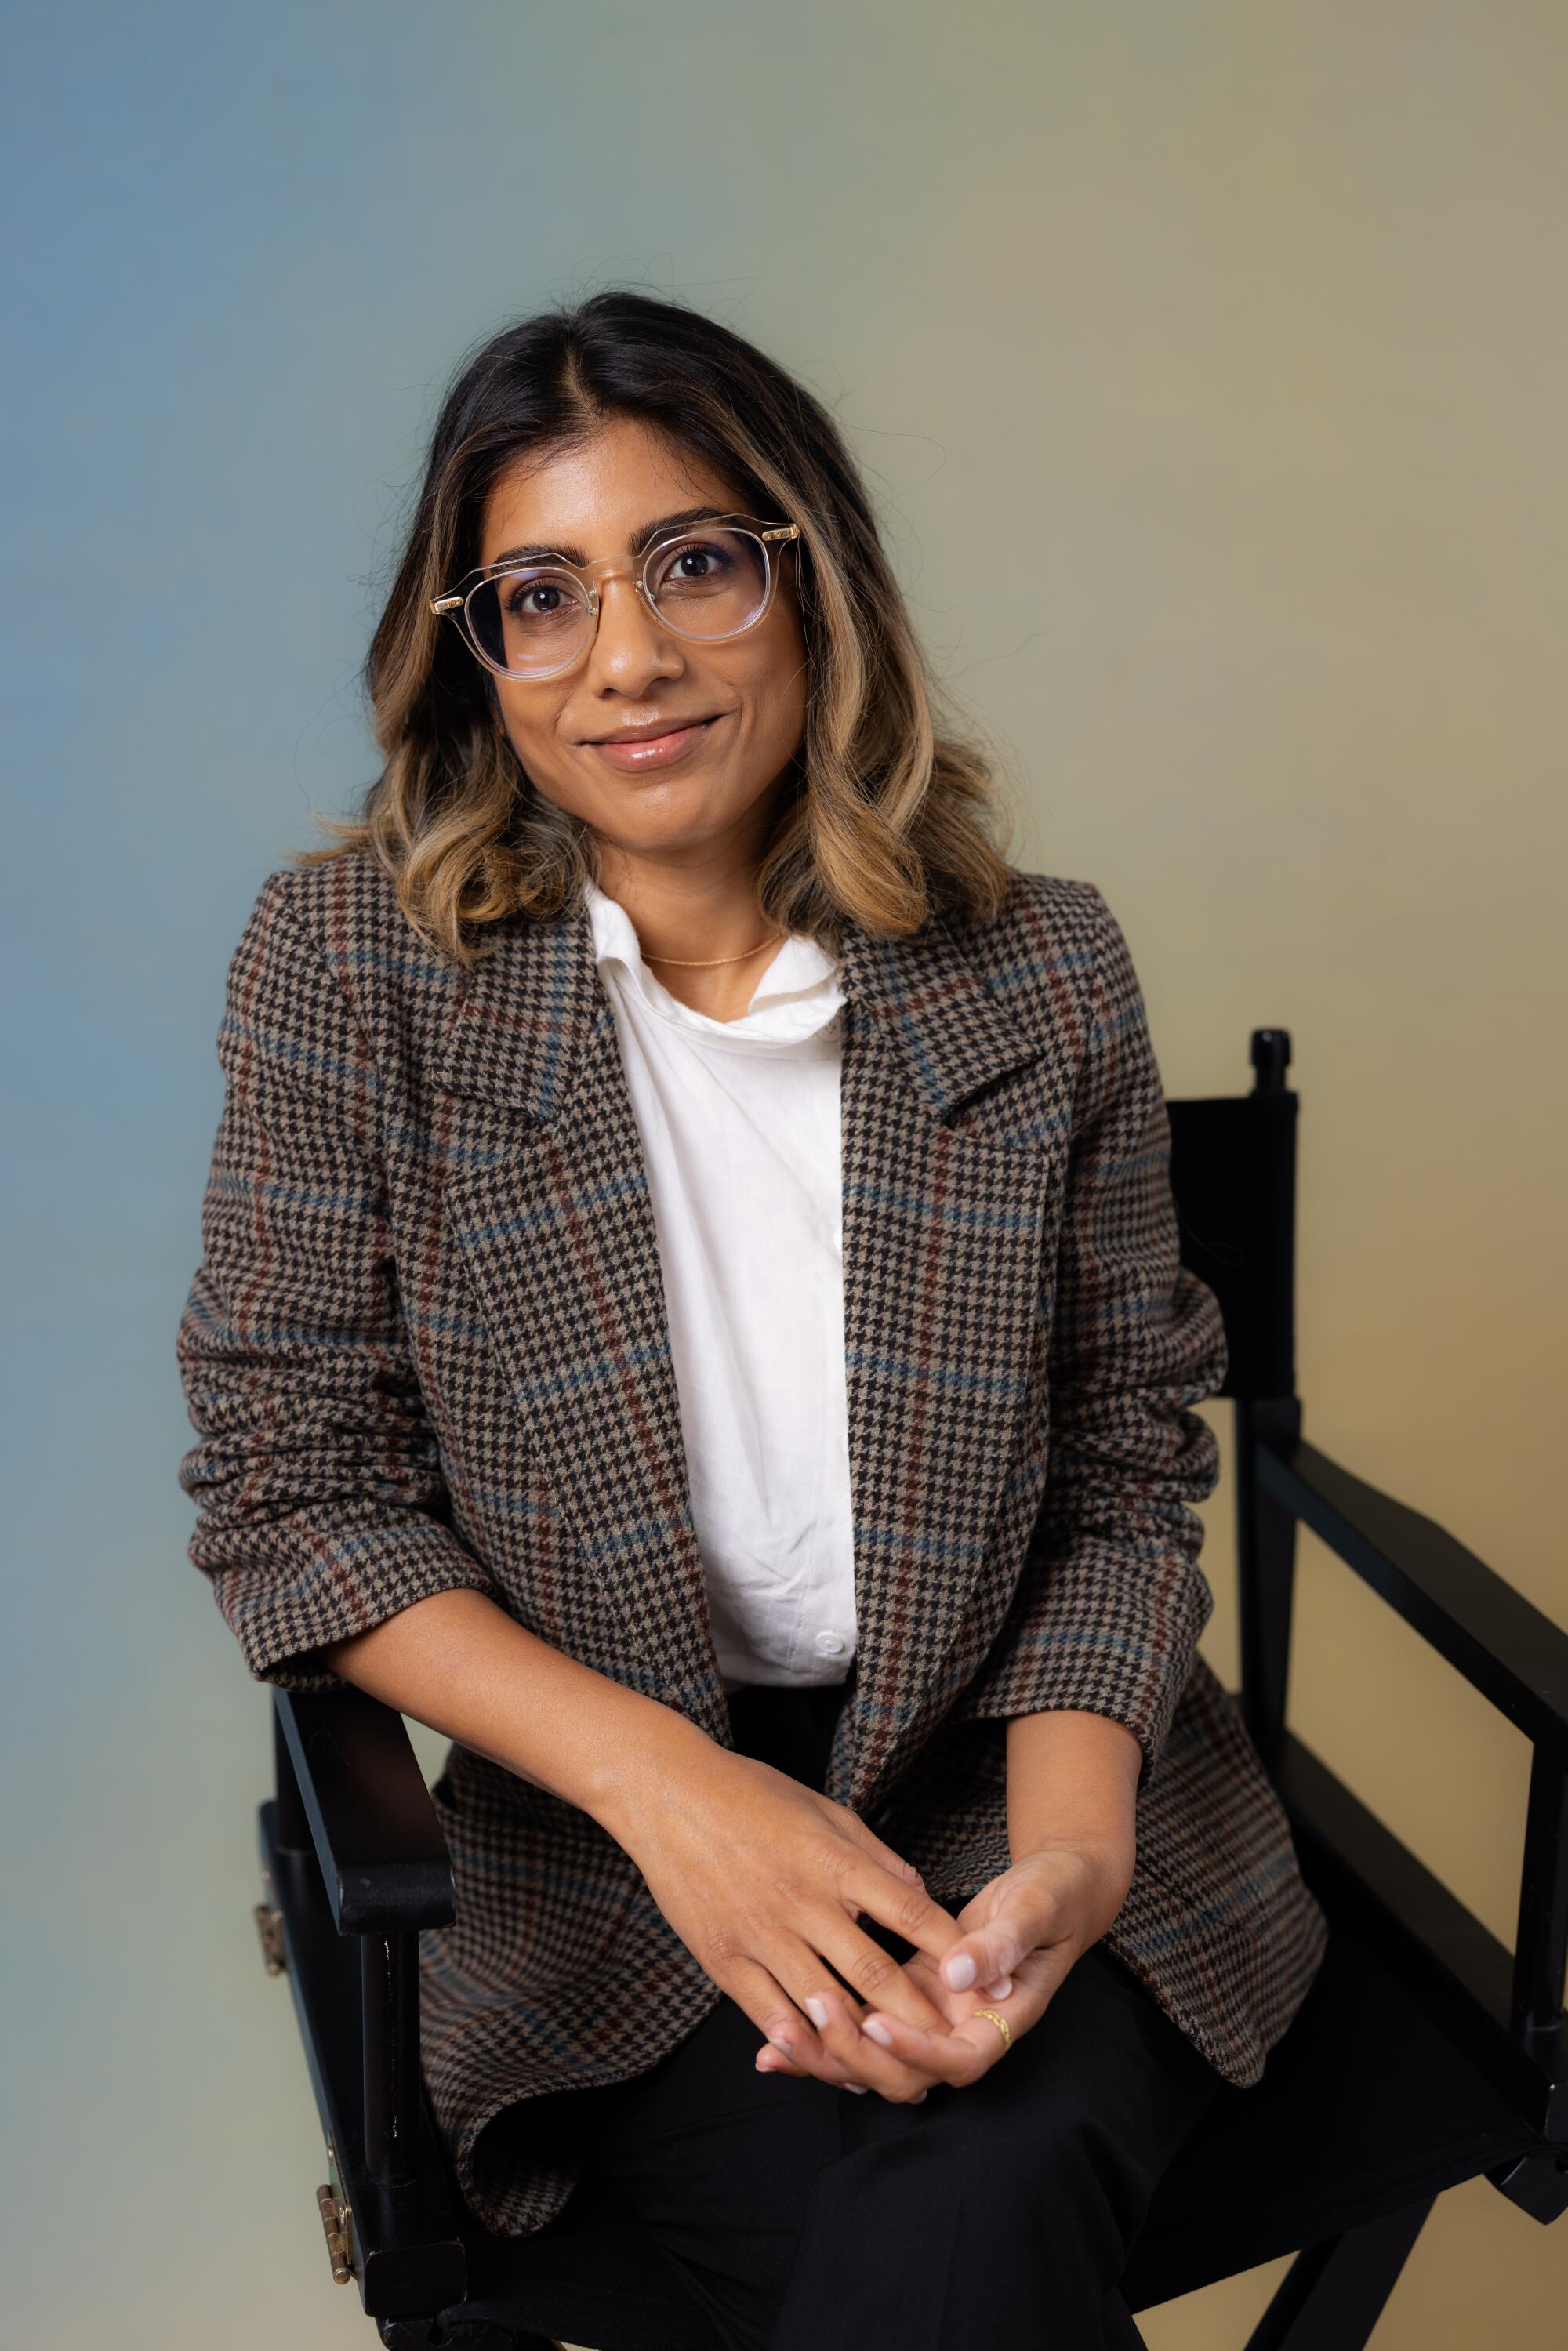 Minhal Baig sits in a chair while wearing a blouse and checked jacket.